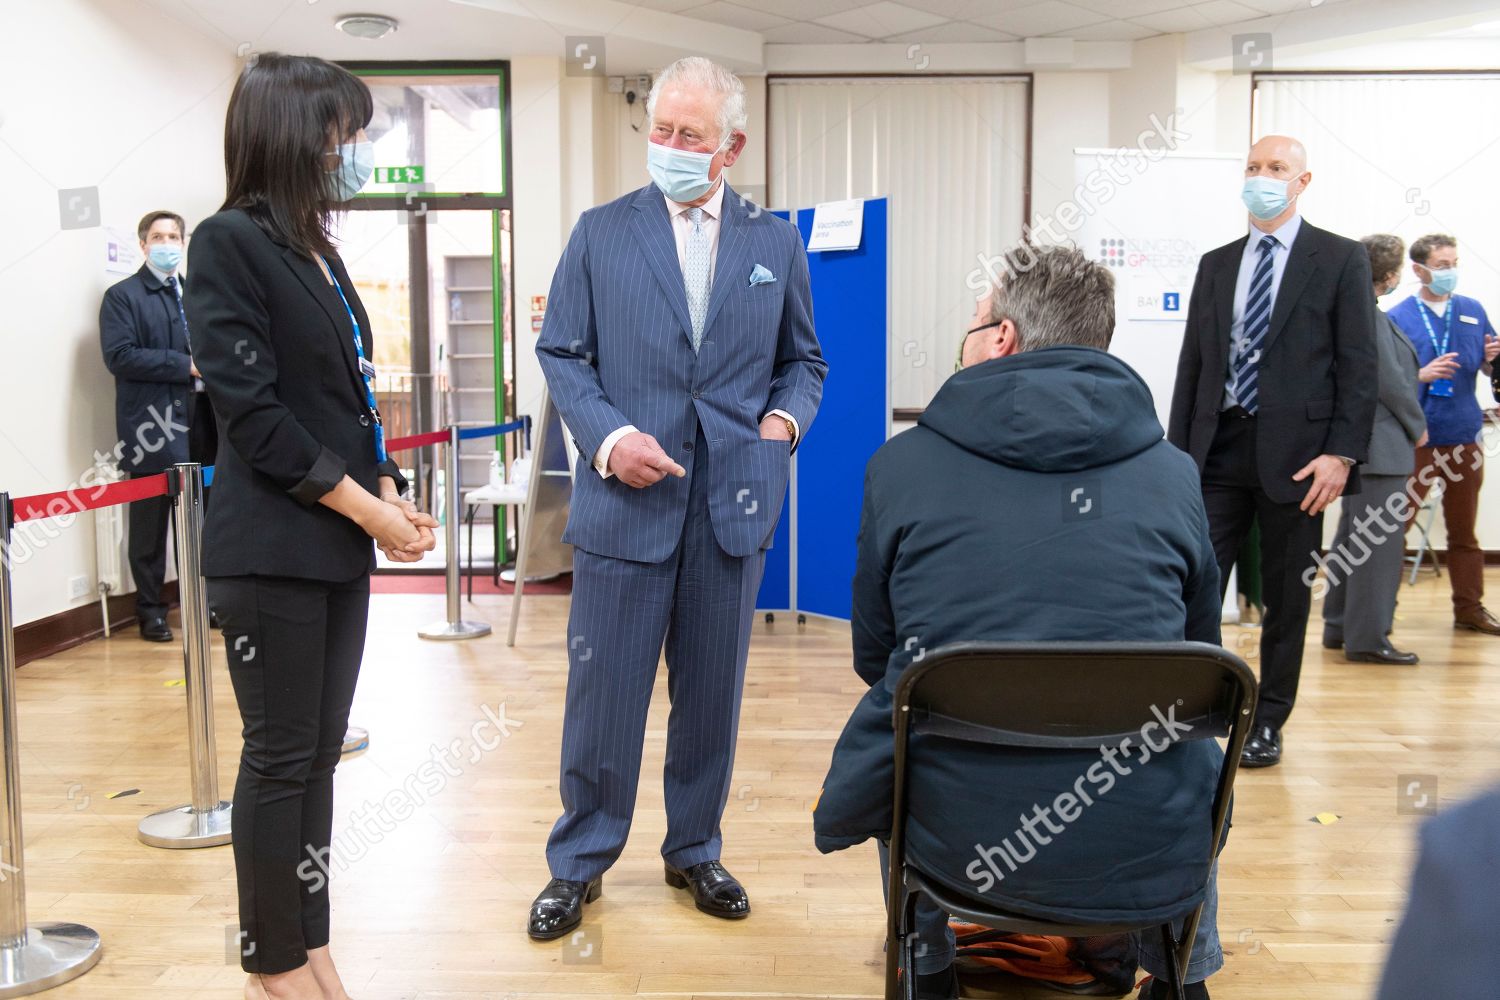 prince-charles-and-camilla-duchess-of-cornwall-visit-vaccination-pop-up-centre-at-finsbury-park-mosque-london-uk-shutterstock-editorial-11802378ac.jpg